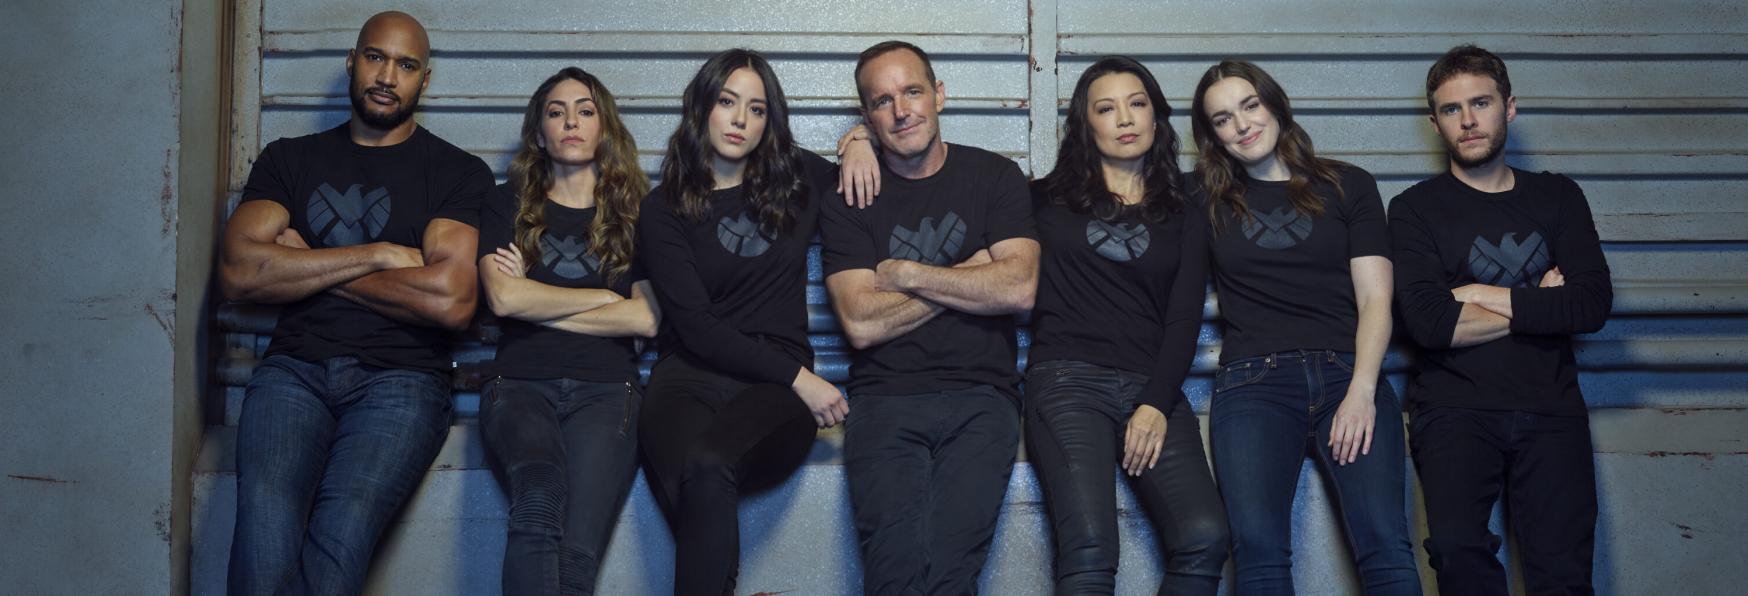 Agents of S.H.I.E.L.D. 7: Phil Coulson torna nel nuovo Teaser Trailer